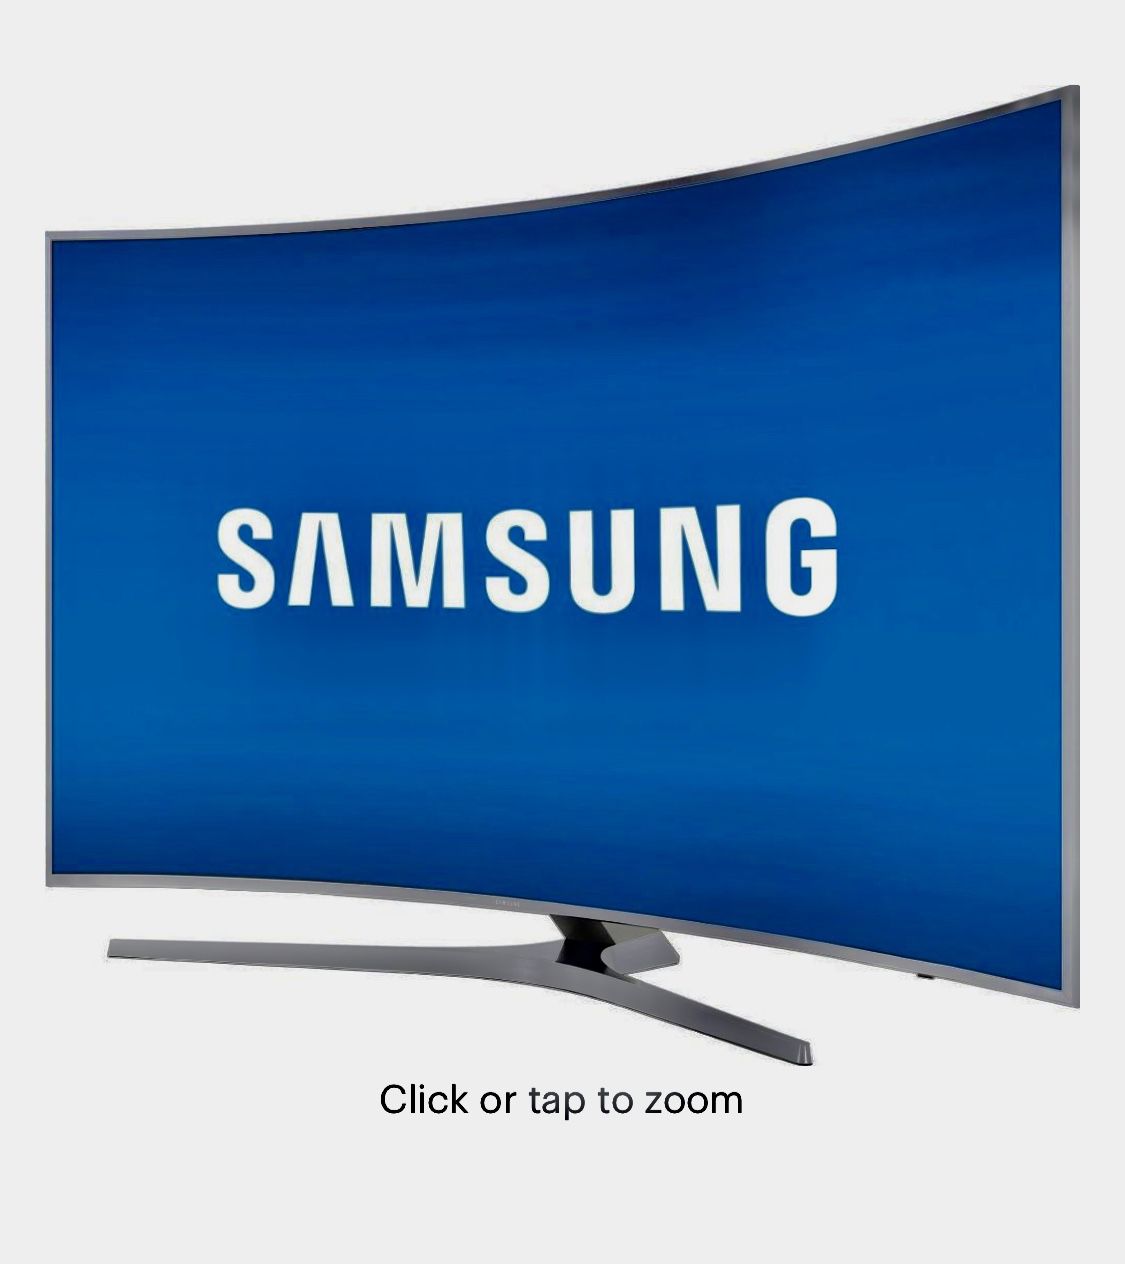 4K Samsung Curved 55 Inch UHD TV. Cost over $2K less than a year ago